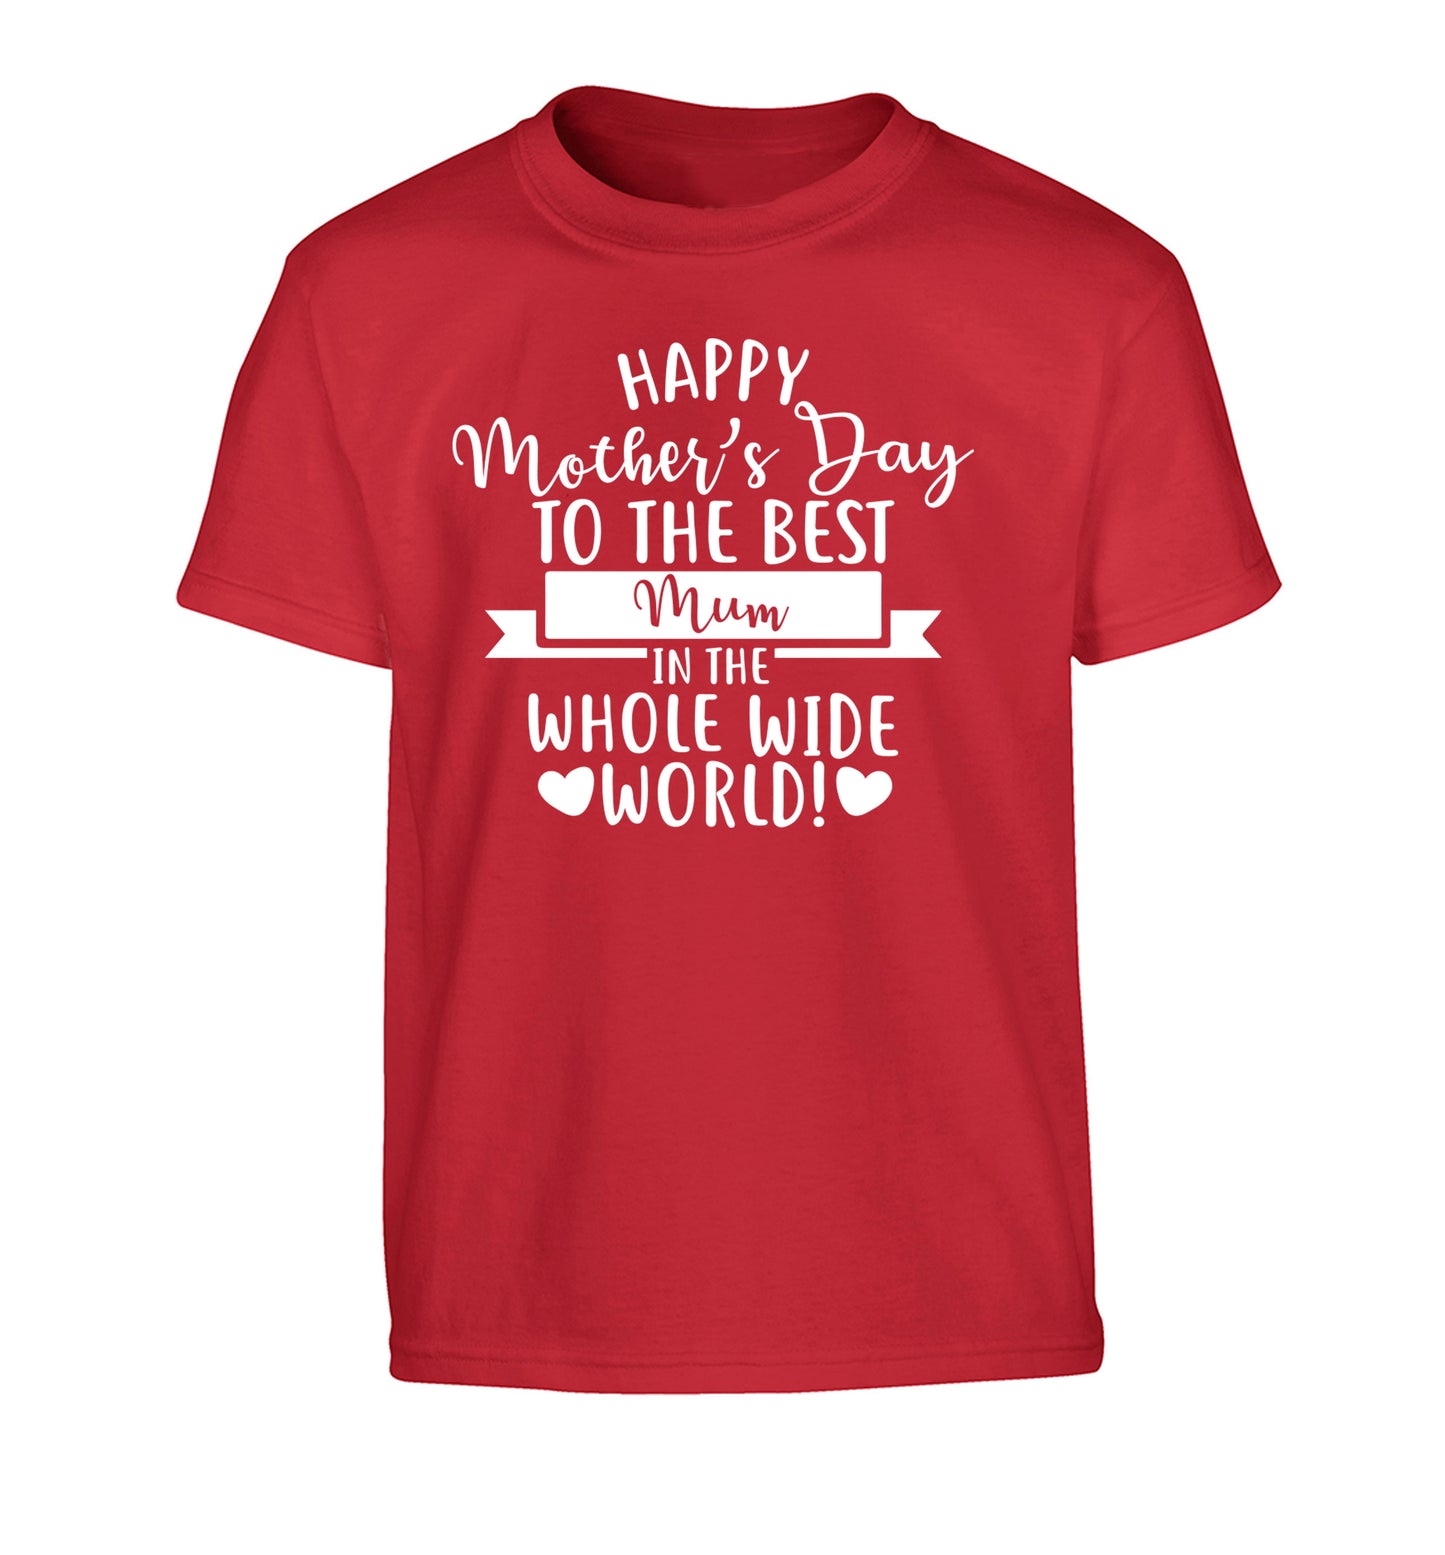 Happy Mother's Day to the best mum in the whole wide world! Children's red Tshirt 12-13 Years